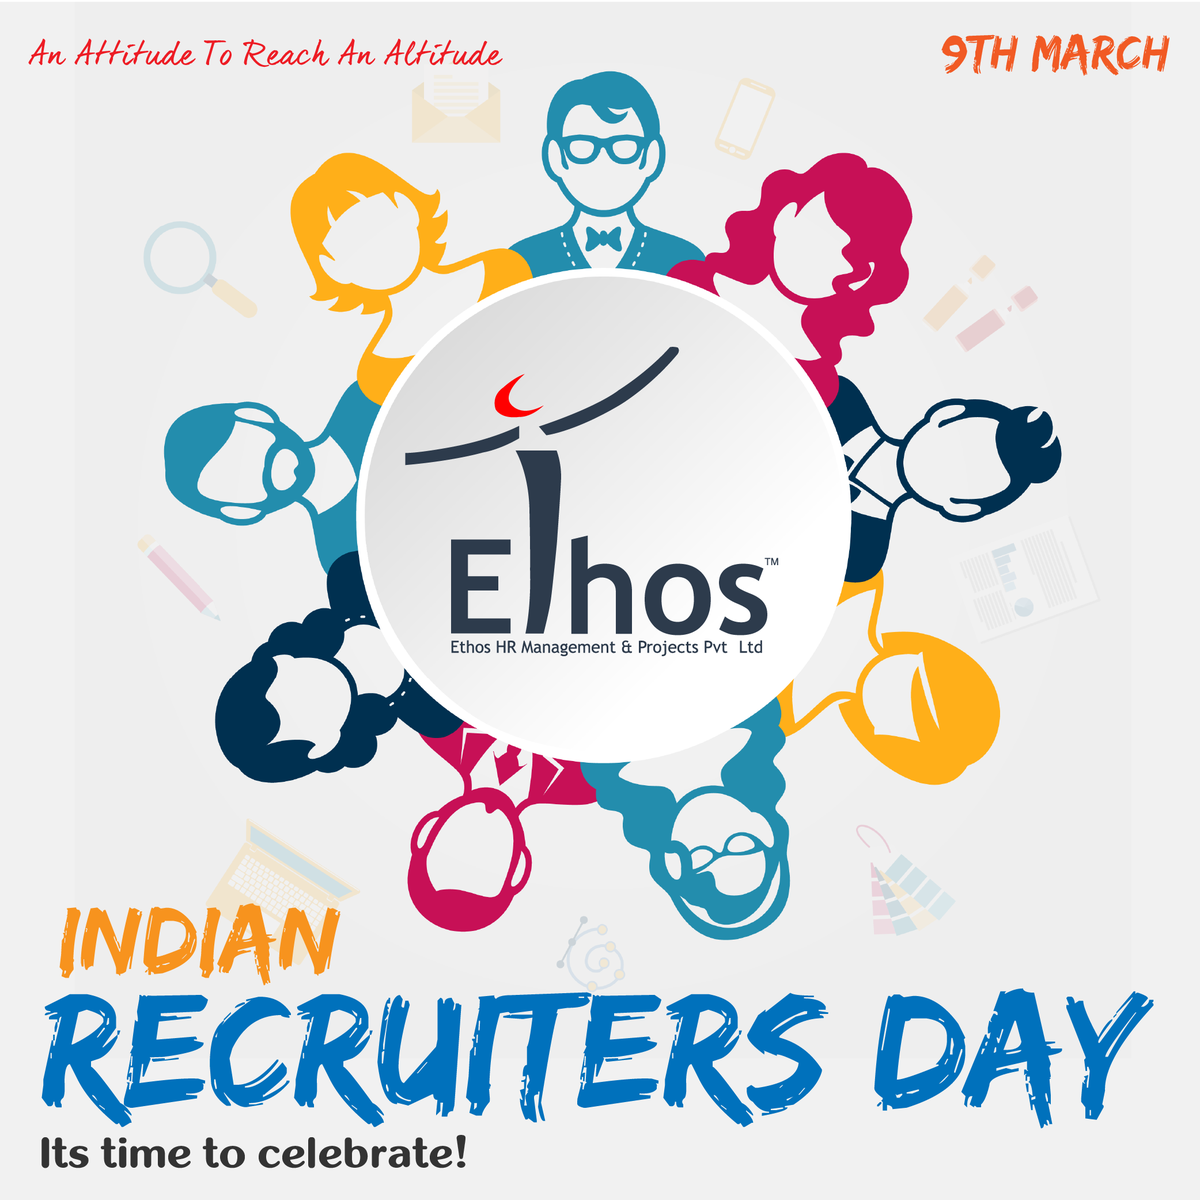 #IndianRecruitersDay

Its time to celebrate each other!
We, the proud recruiters! http://t.co/xxw1SbSYul